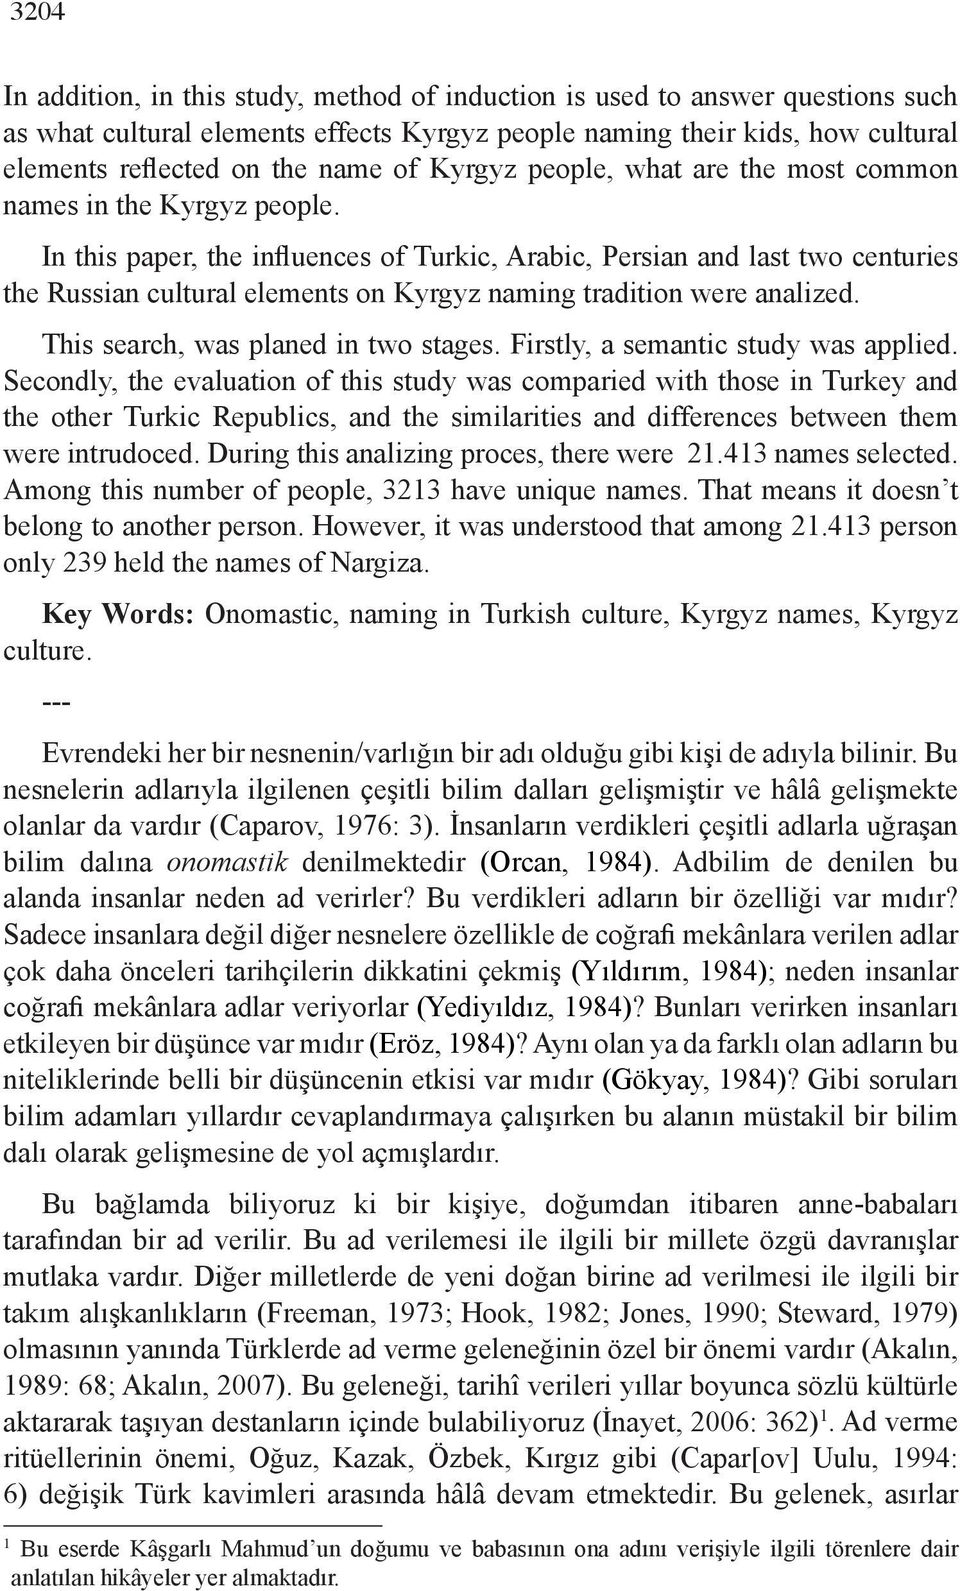 In this paper, the influences of Turkic, Arabic, Persian and last two centuries the Russian cultural elements on Kyrgyz naming tradition were analized. This search, was planed in two stages.